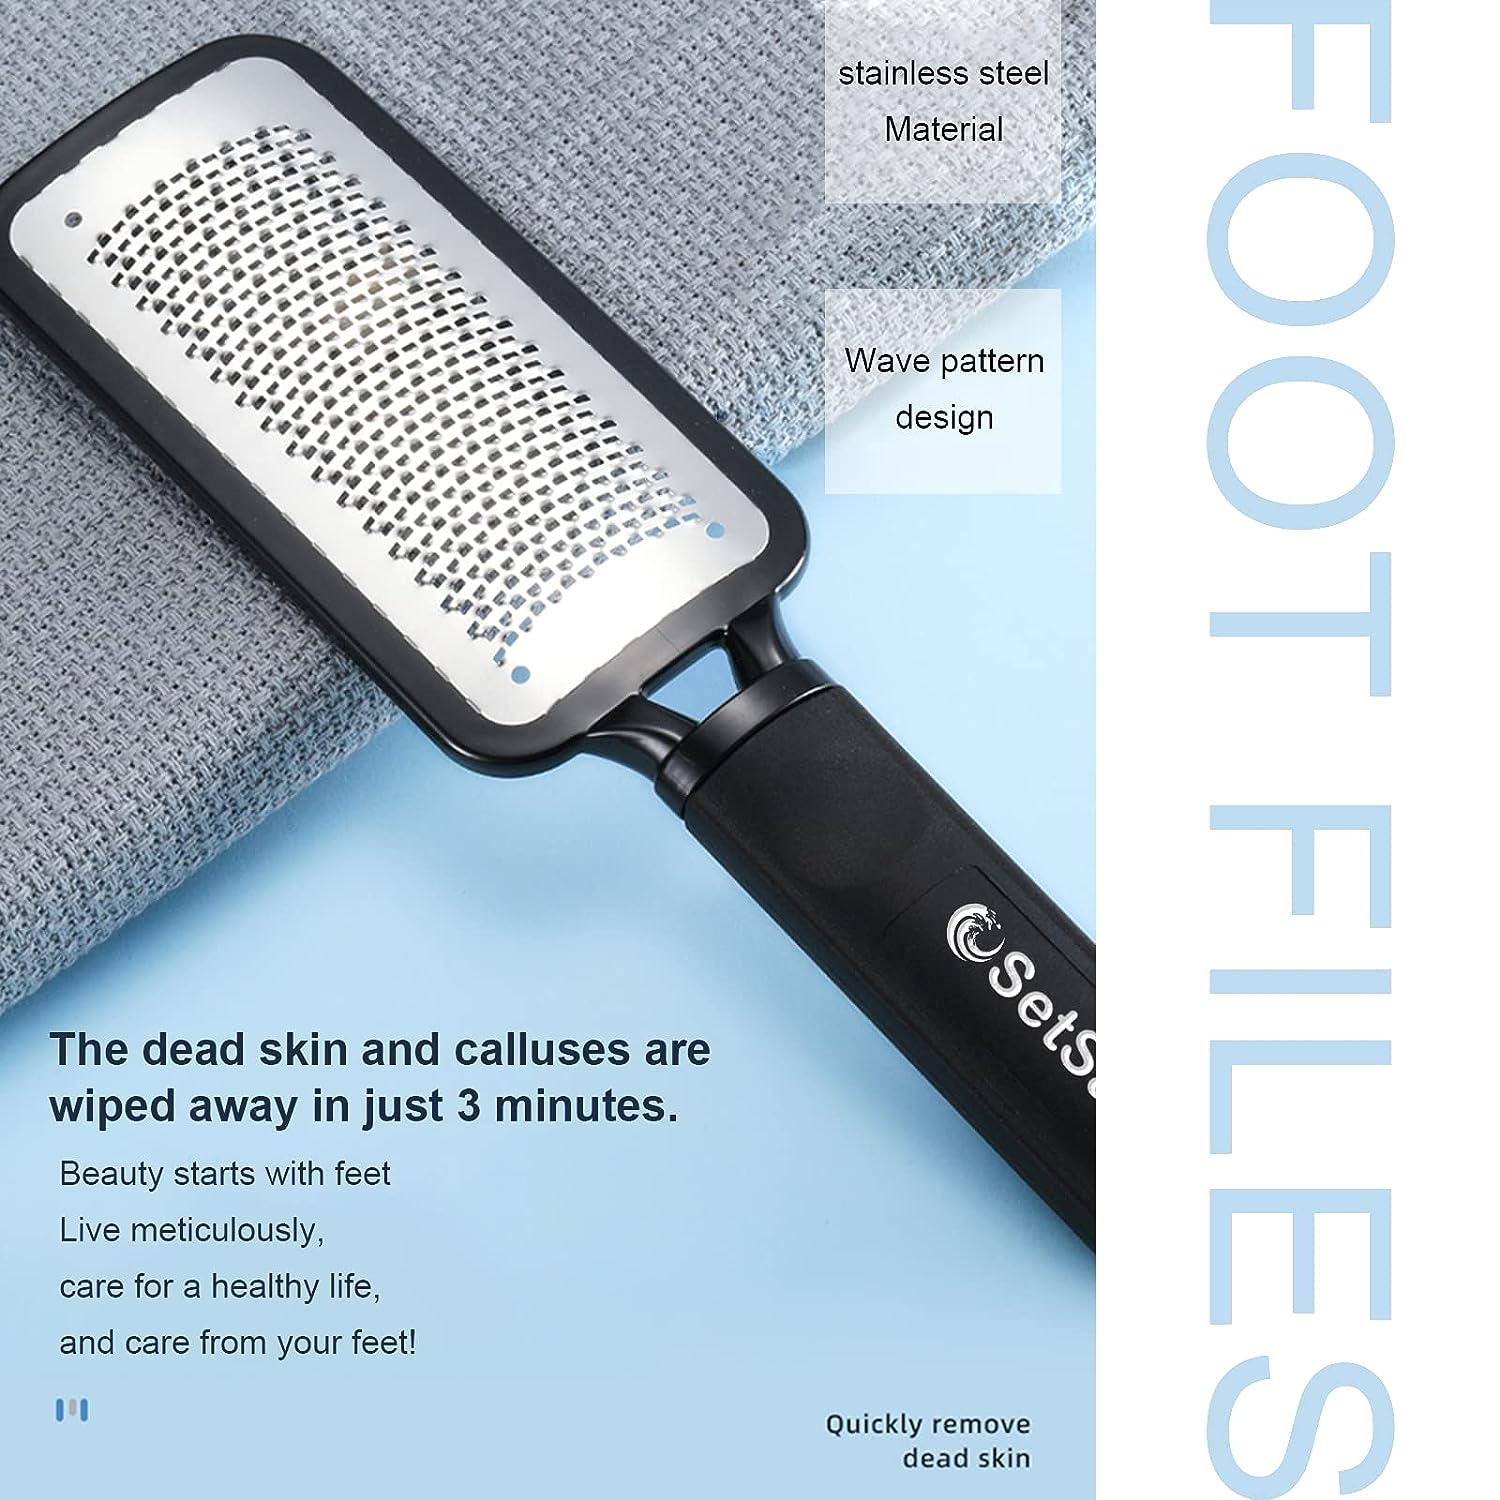 SetSail Callus Remover for Feet 2 Pack Foot File Kits Rust-Free Foot  Scrubber Premium Stainless Steel Pedicure Tools Can be Used on Both Wet and Dry  Feet, Foot Scraper for Dead Skin